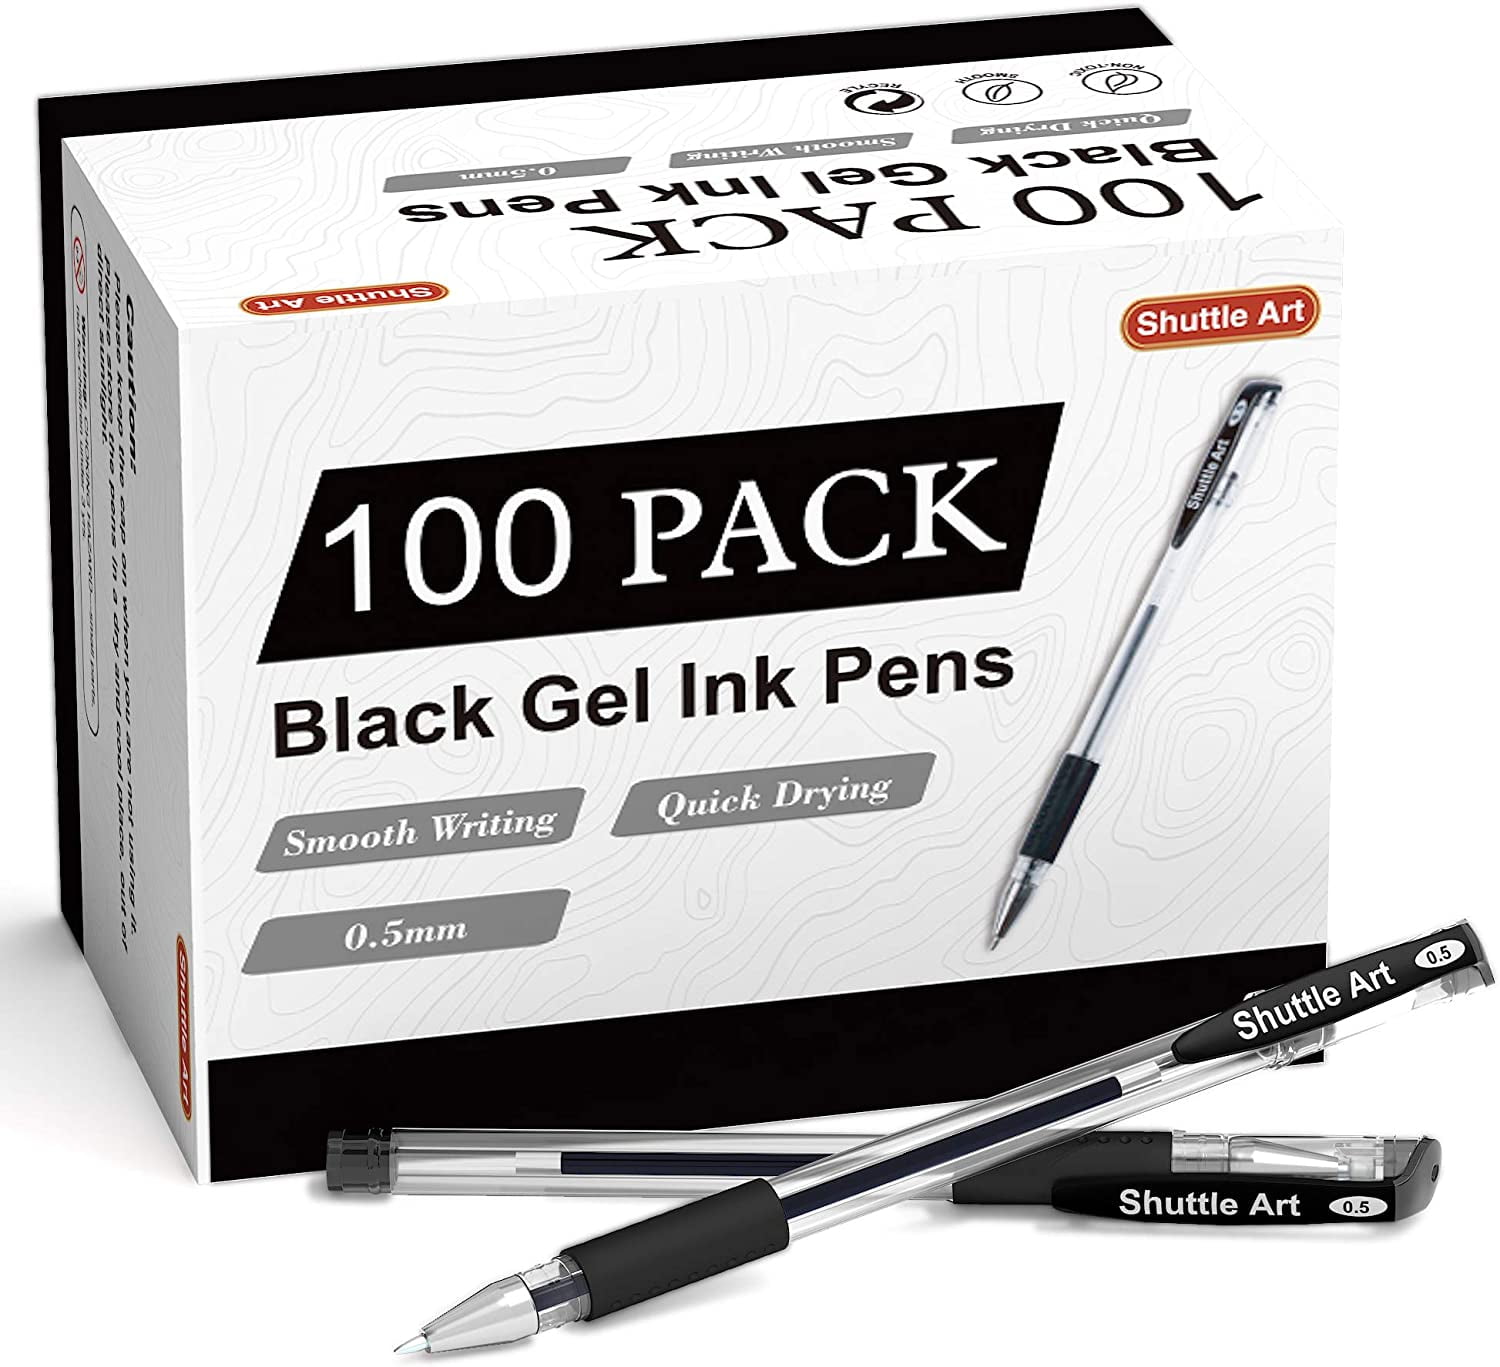  LOVENIMEN Gel Ink Rollerball Pens, 0.3 mm, Dong-a Rabbit Fine  Point Fine-Tech Excellent Smooth Writing, Metal Needle Tip Ink Pen - Black  12 Pack : Office Products